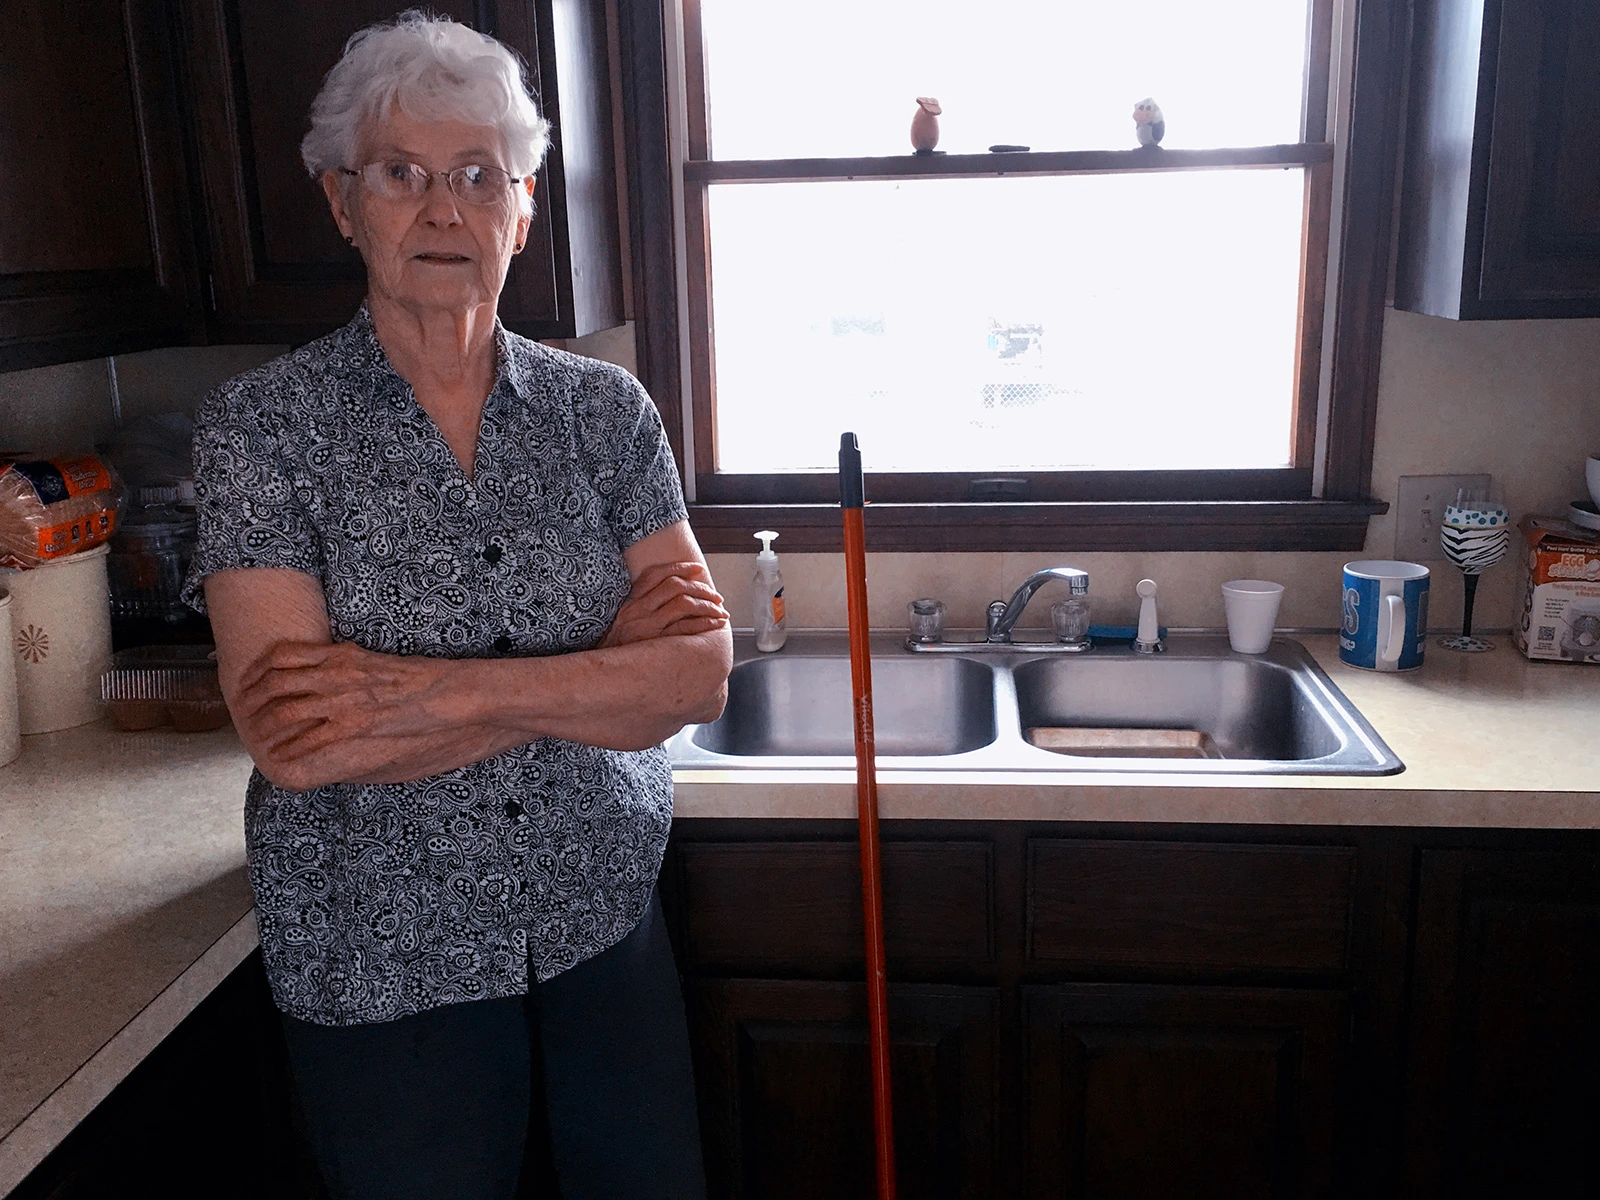 Grandmotherly figure standing in the kitchen with arms crossed